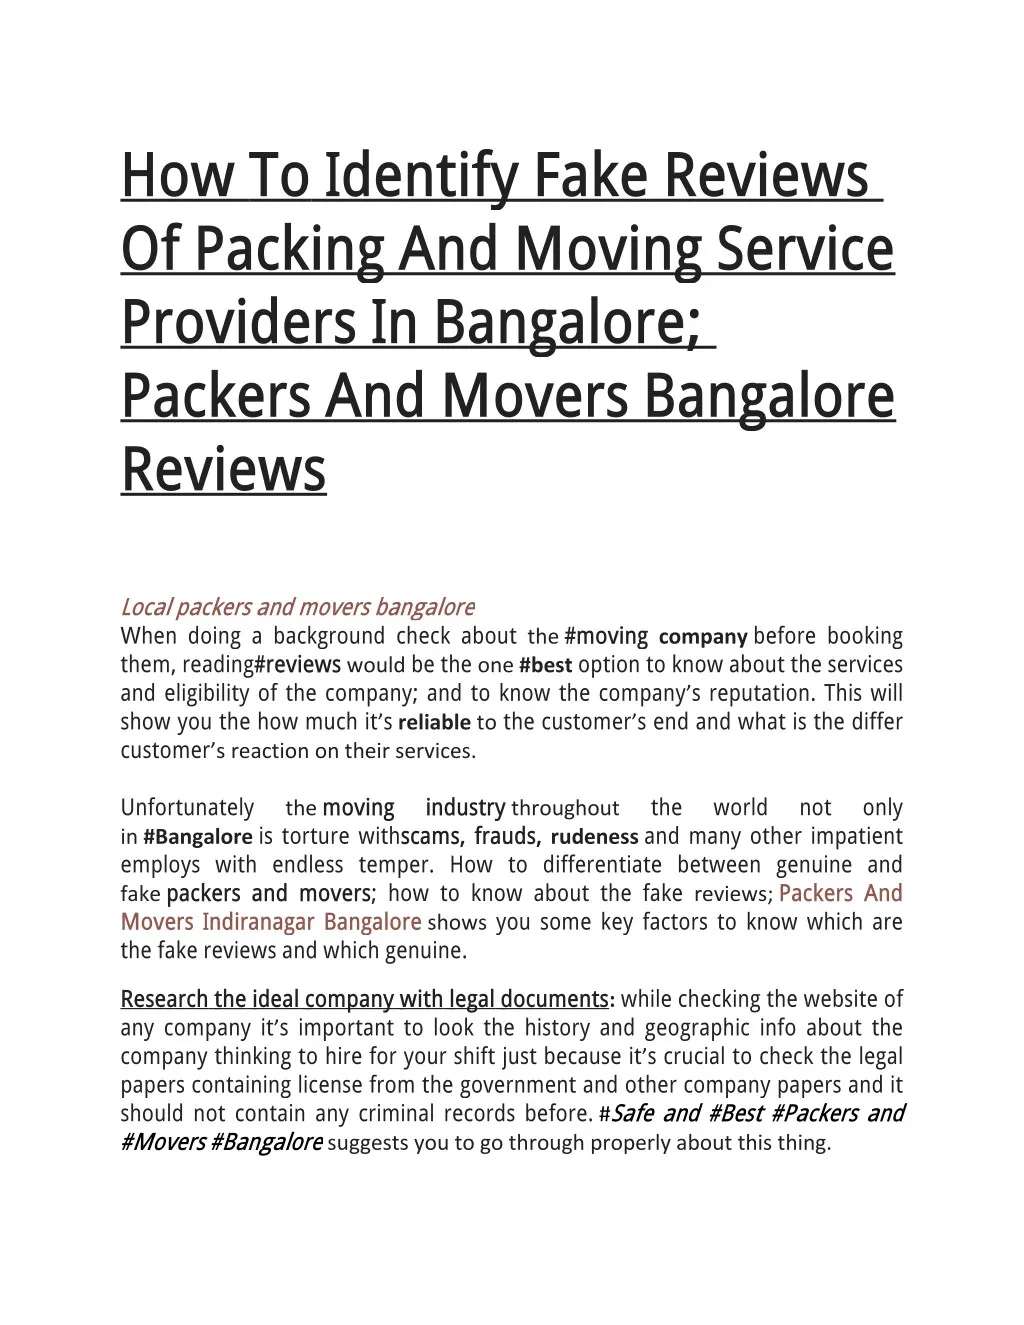 how to identify fake reviews of packing